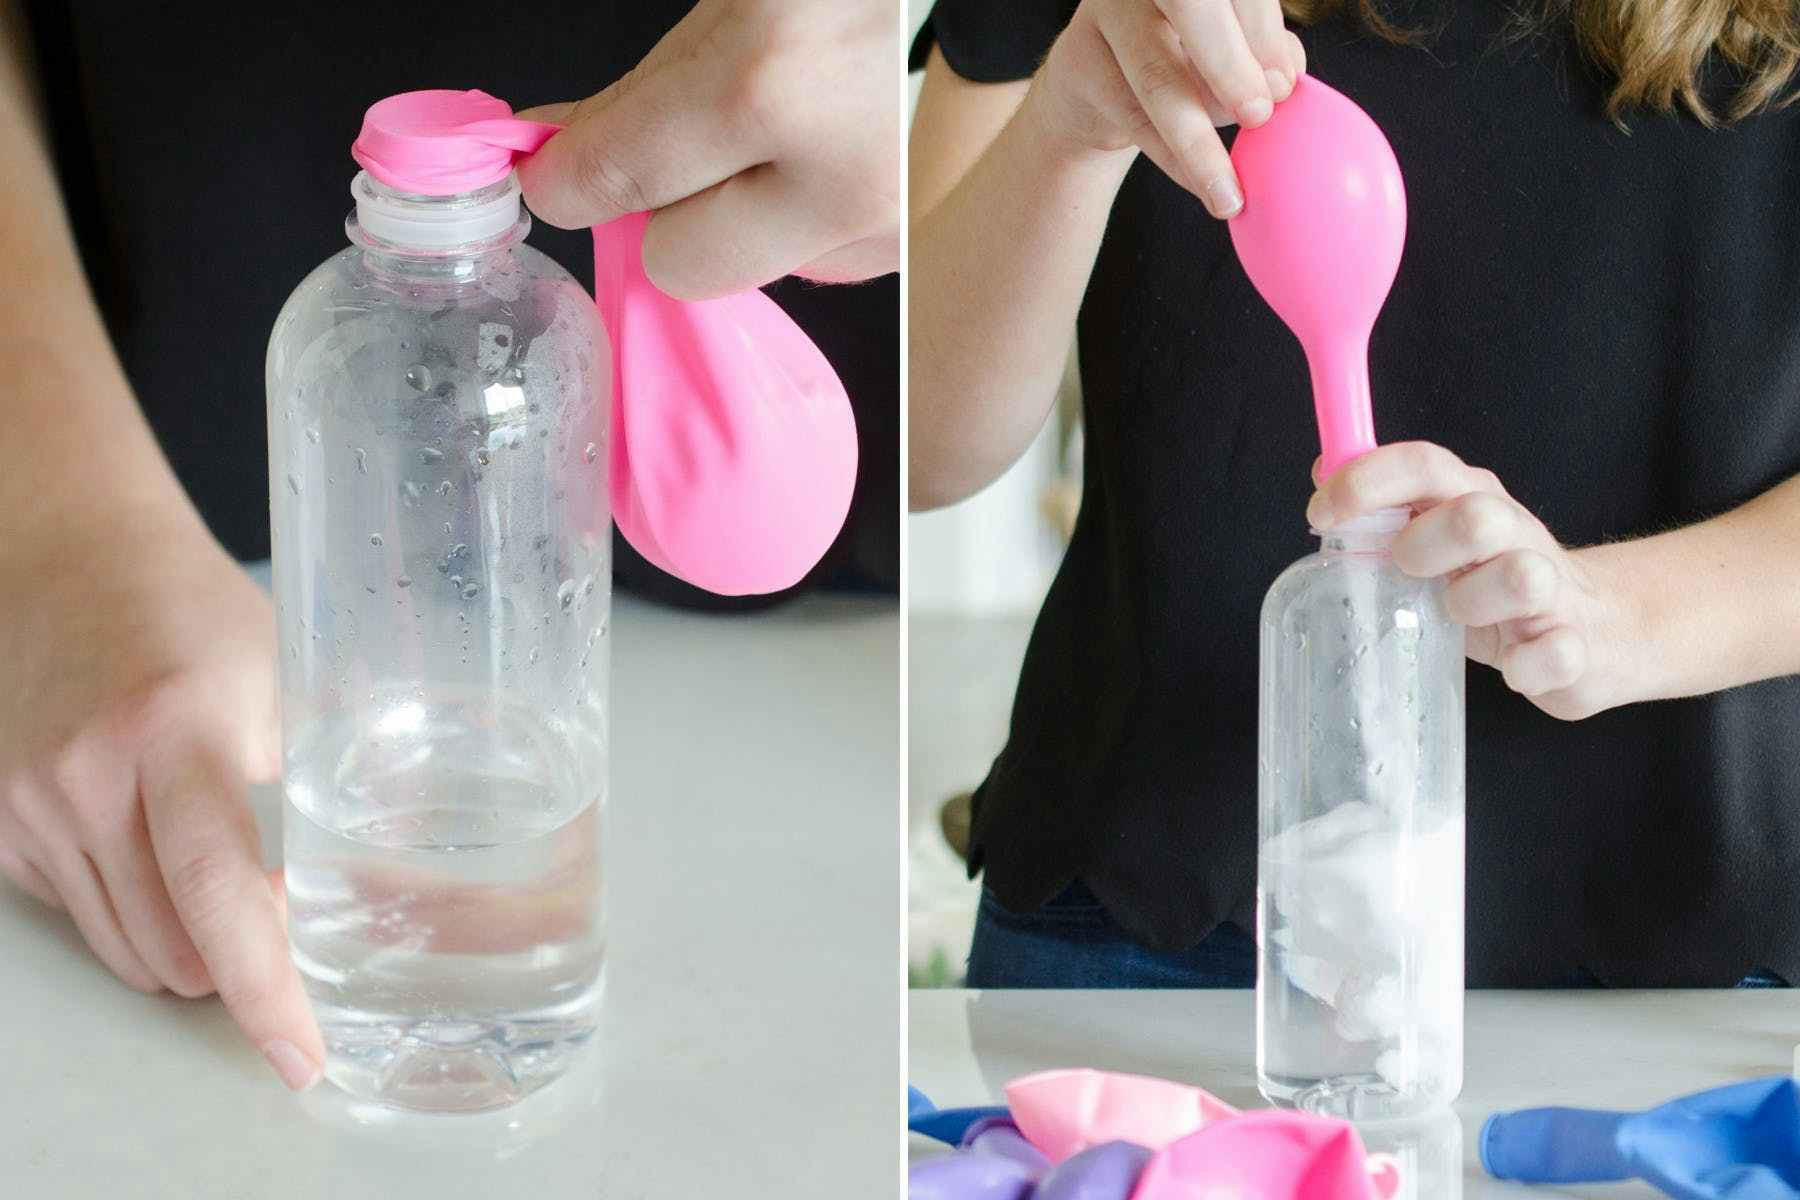 Someone lifting a balloon full of baking soda over a bottle with vinegar in it